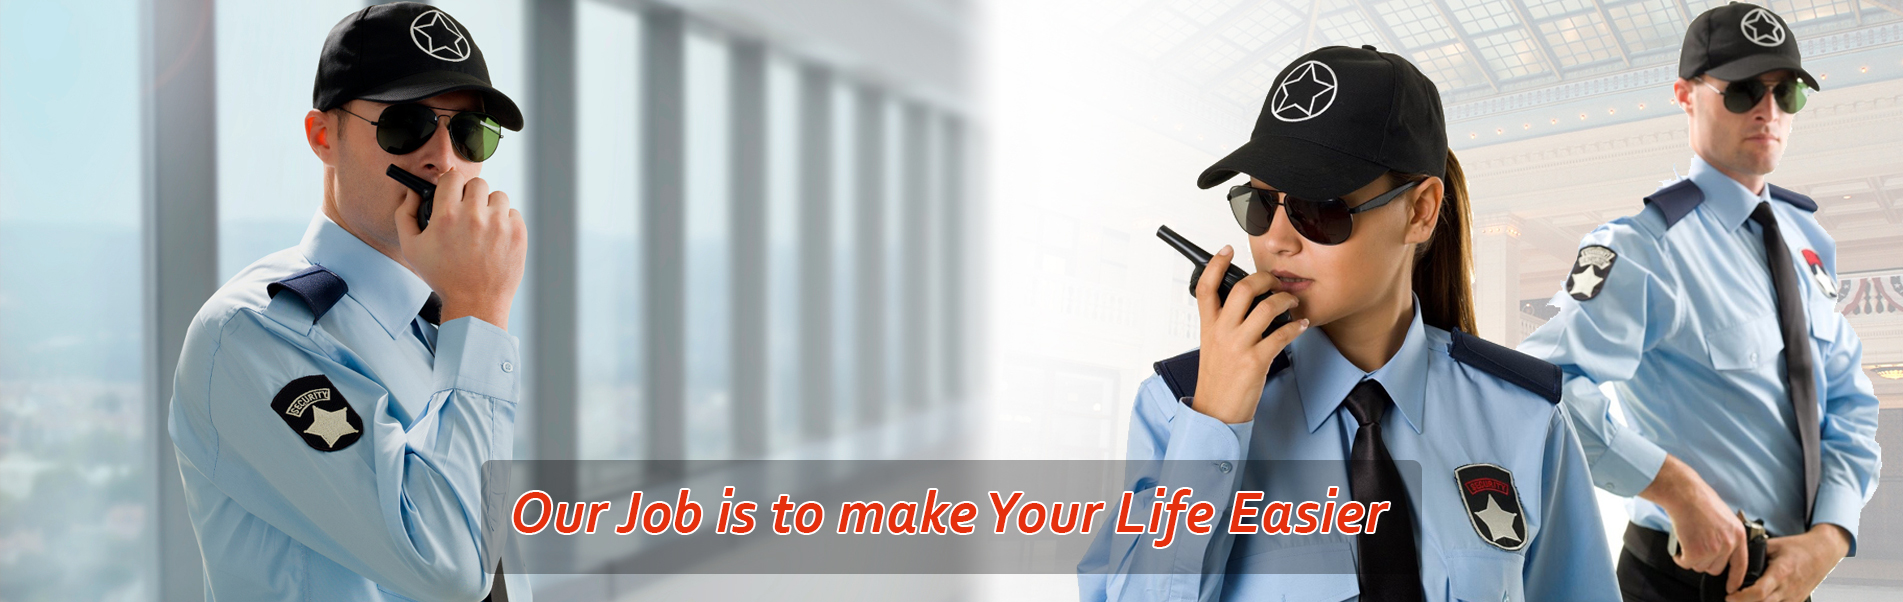 Our Job is to make Your Life Easier